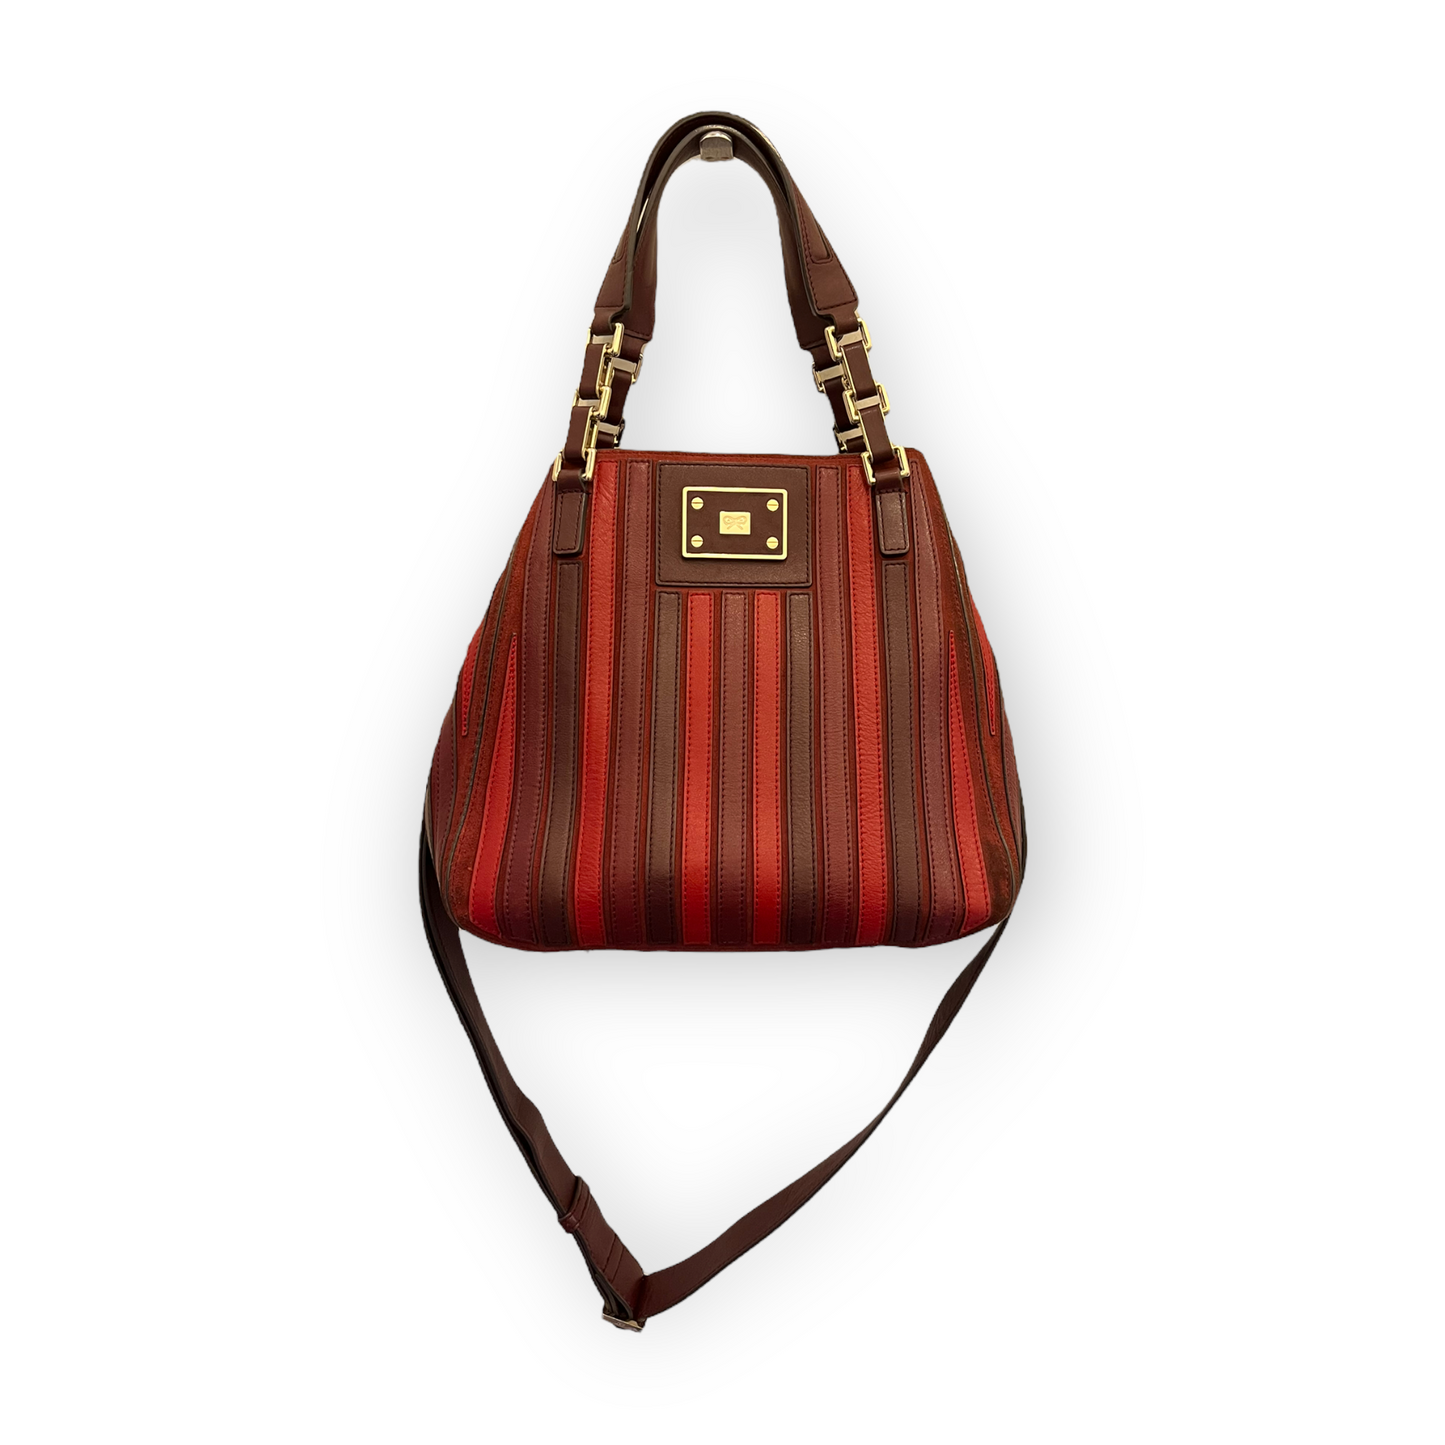 Anya Hindmarch Red Belvedere Bag